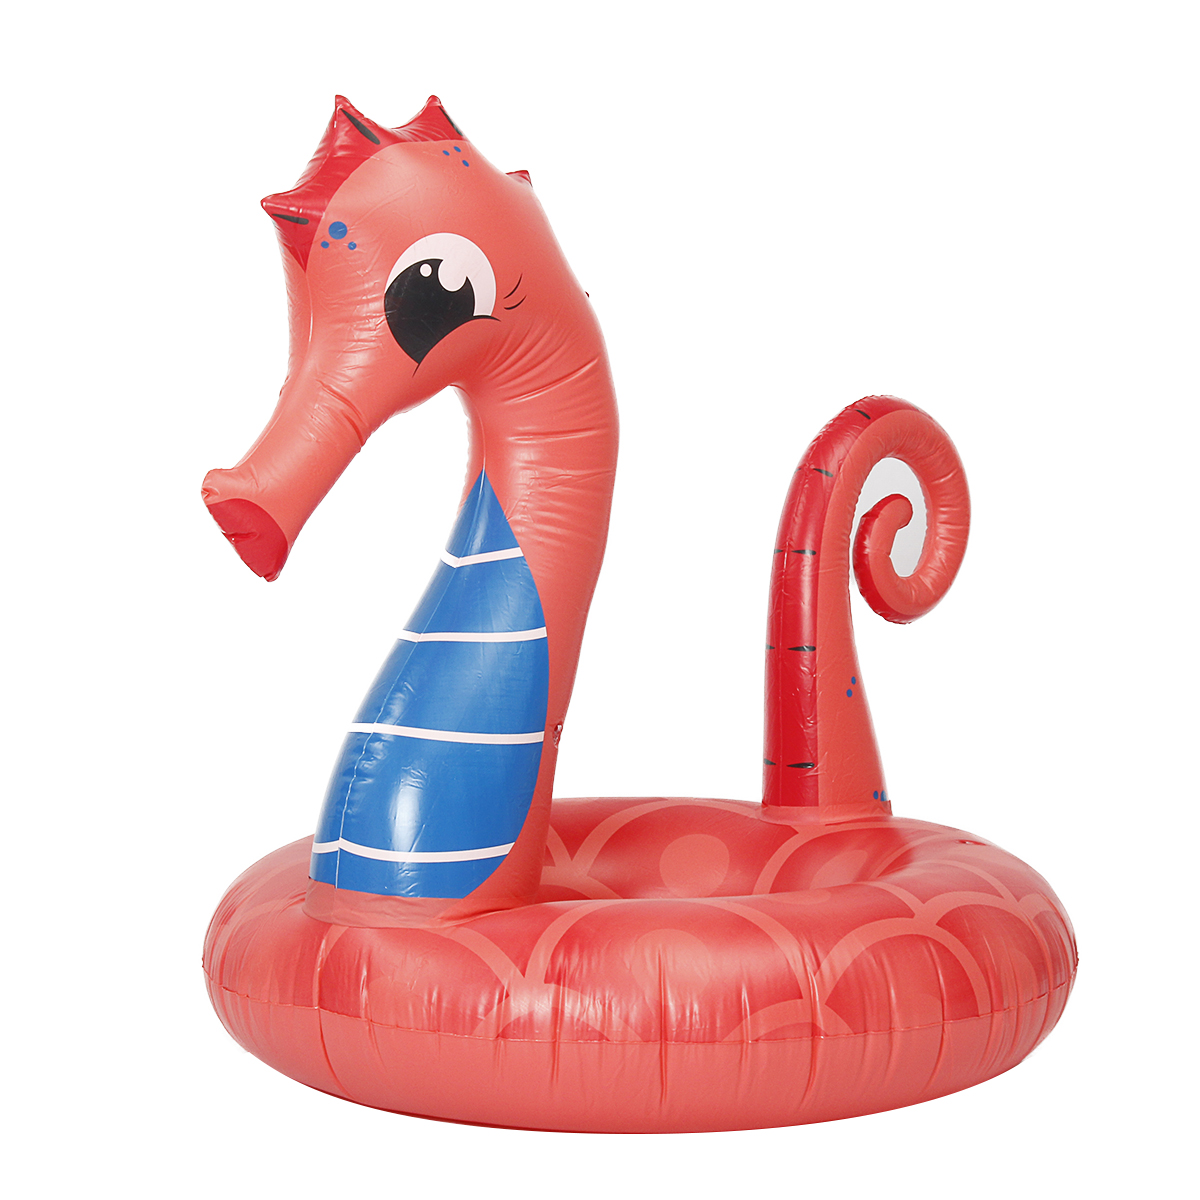 Large-Seahorse-Inflatable-Hippocampus-Giant-Swimming-Pool-Ring-Floats-Bed-Water-Pool-Raft-Camping-Be-1723619-3